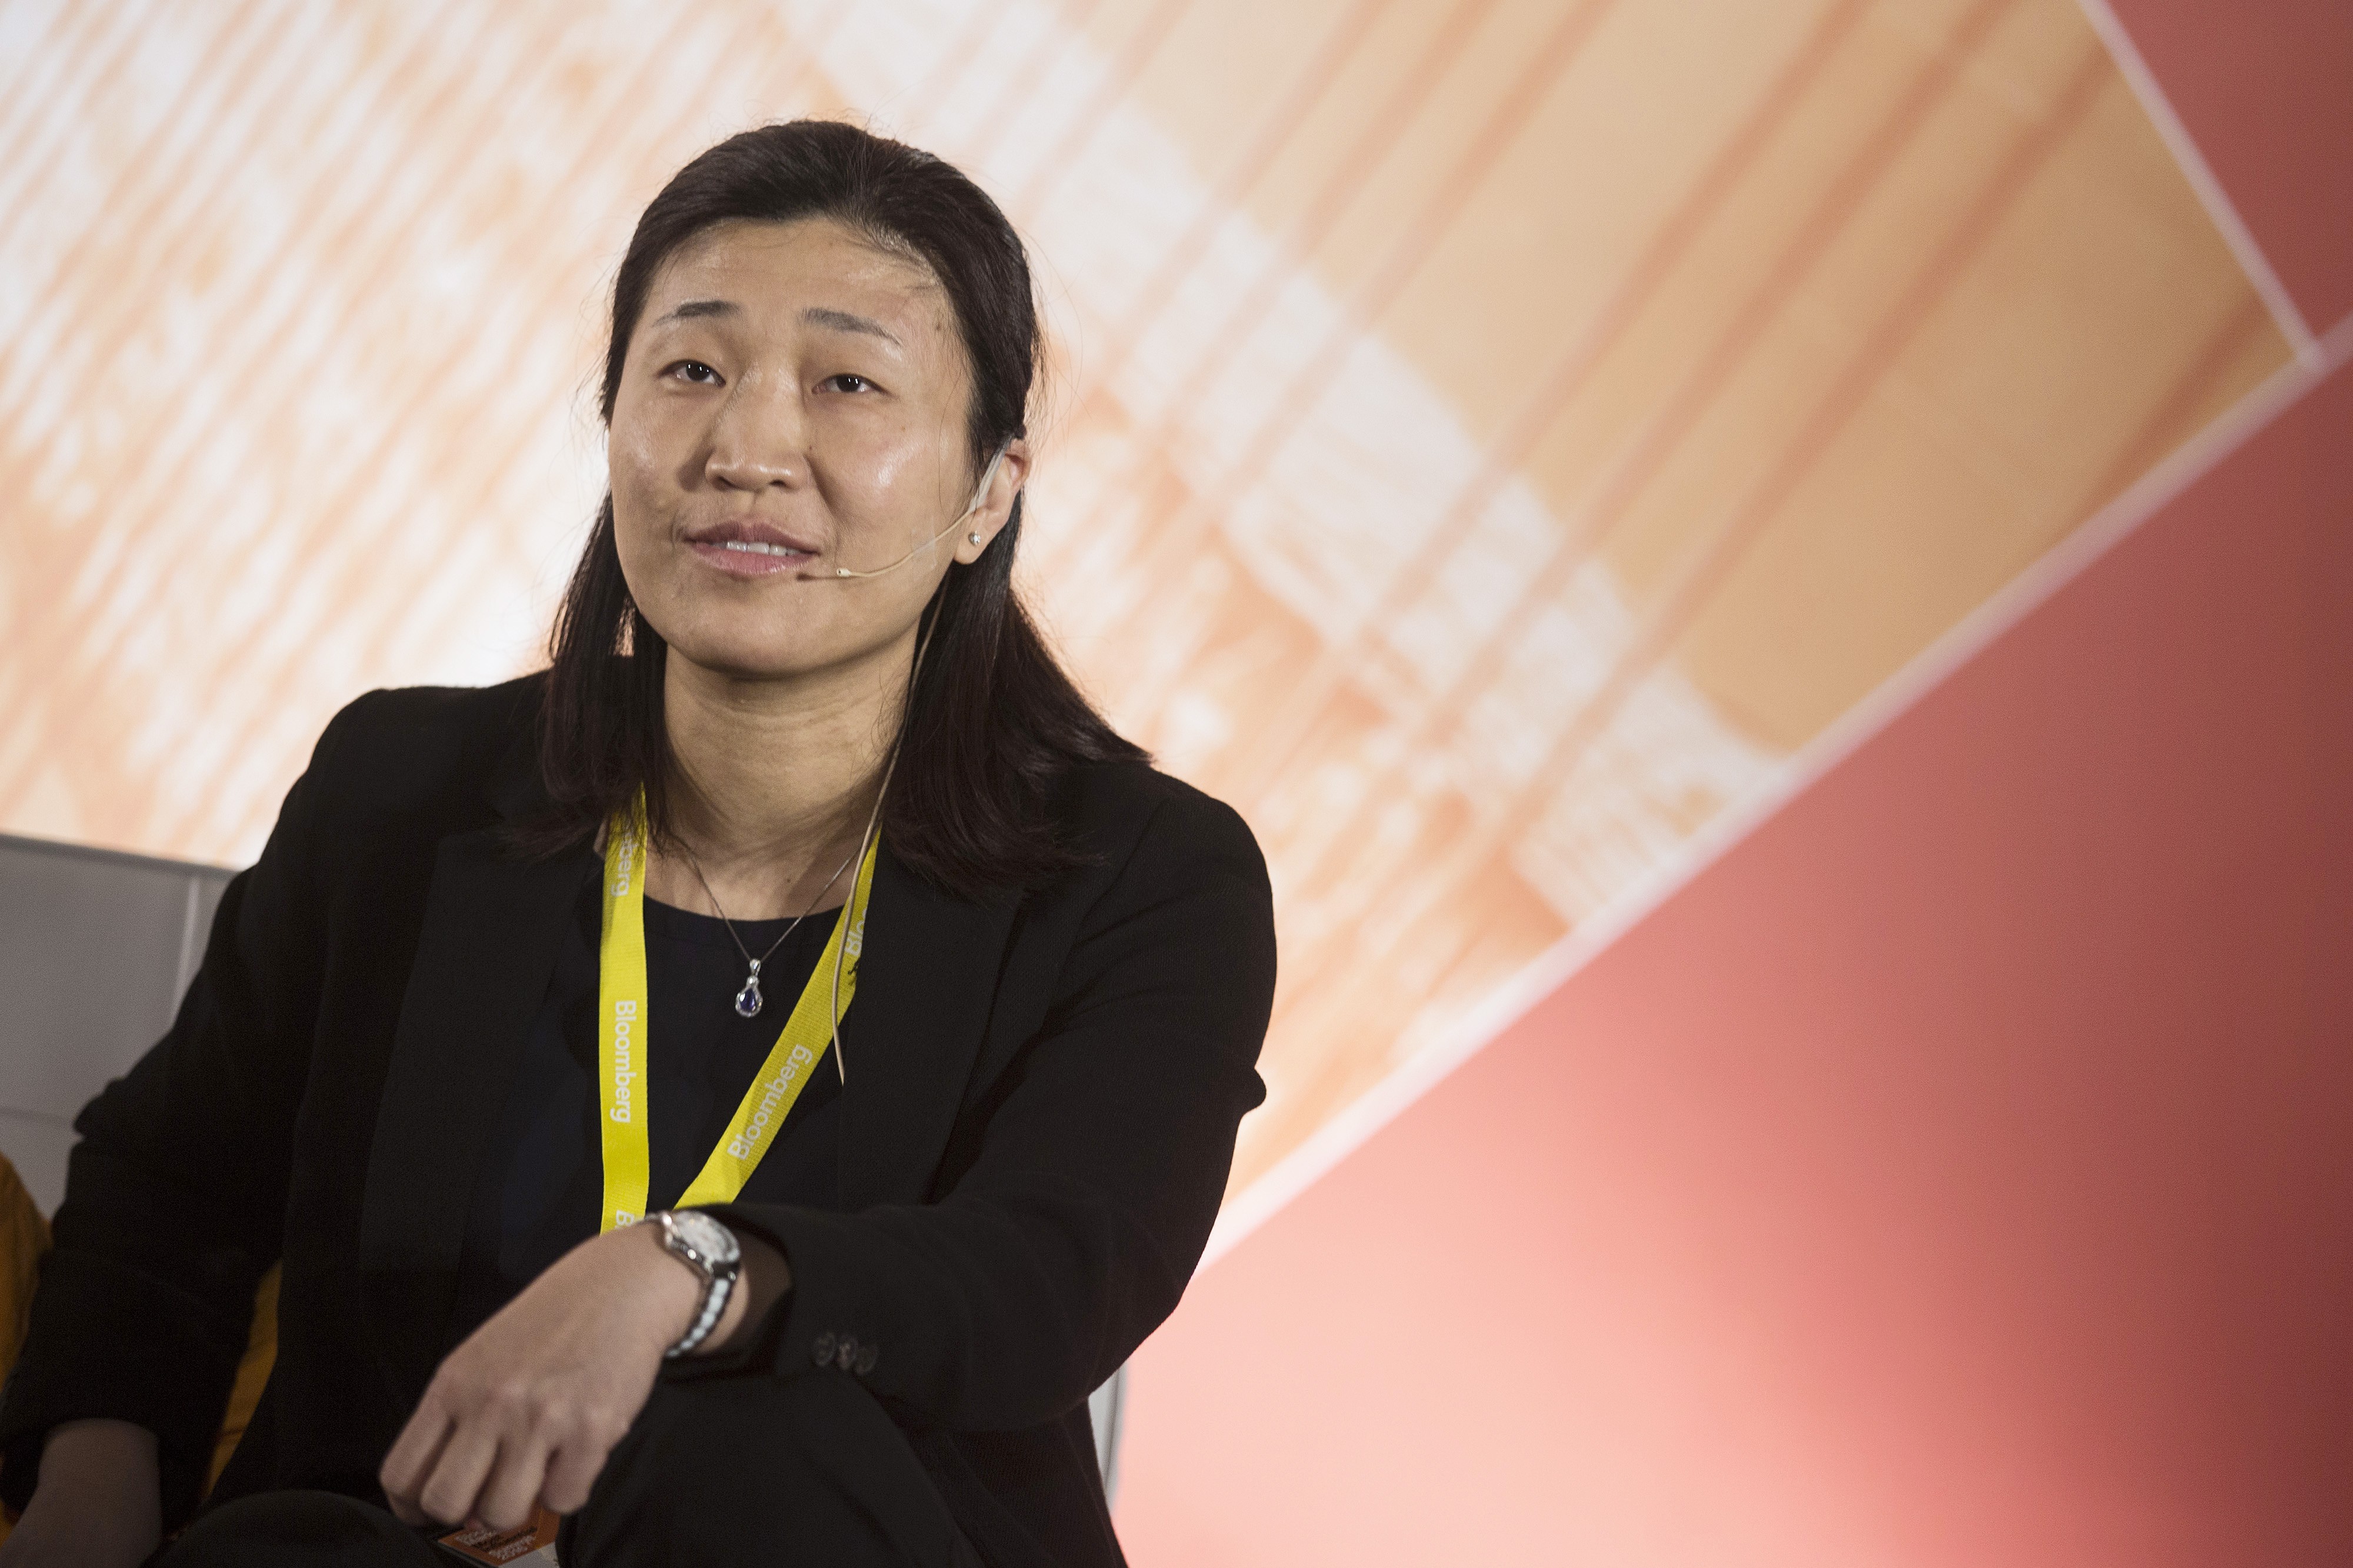 Jenny Lee, managing partner at GGV Capital, attends the Bloomberg Markets Most Influential Summit in Hong Kong on September 28, 2016. Photo: Bloomberg